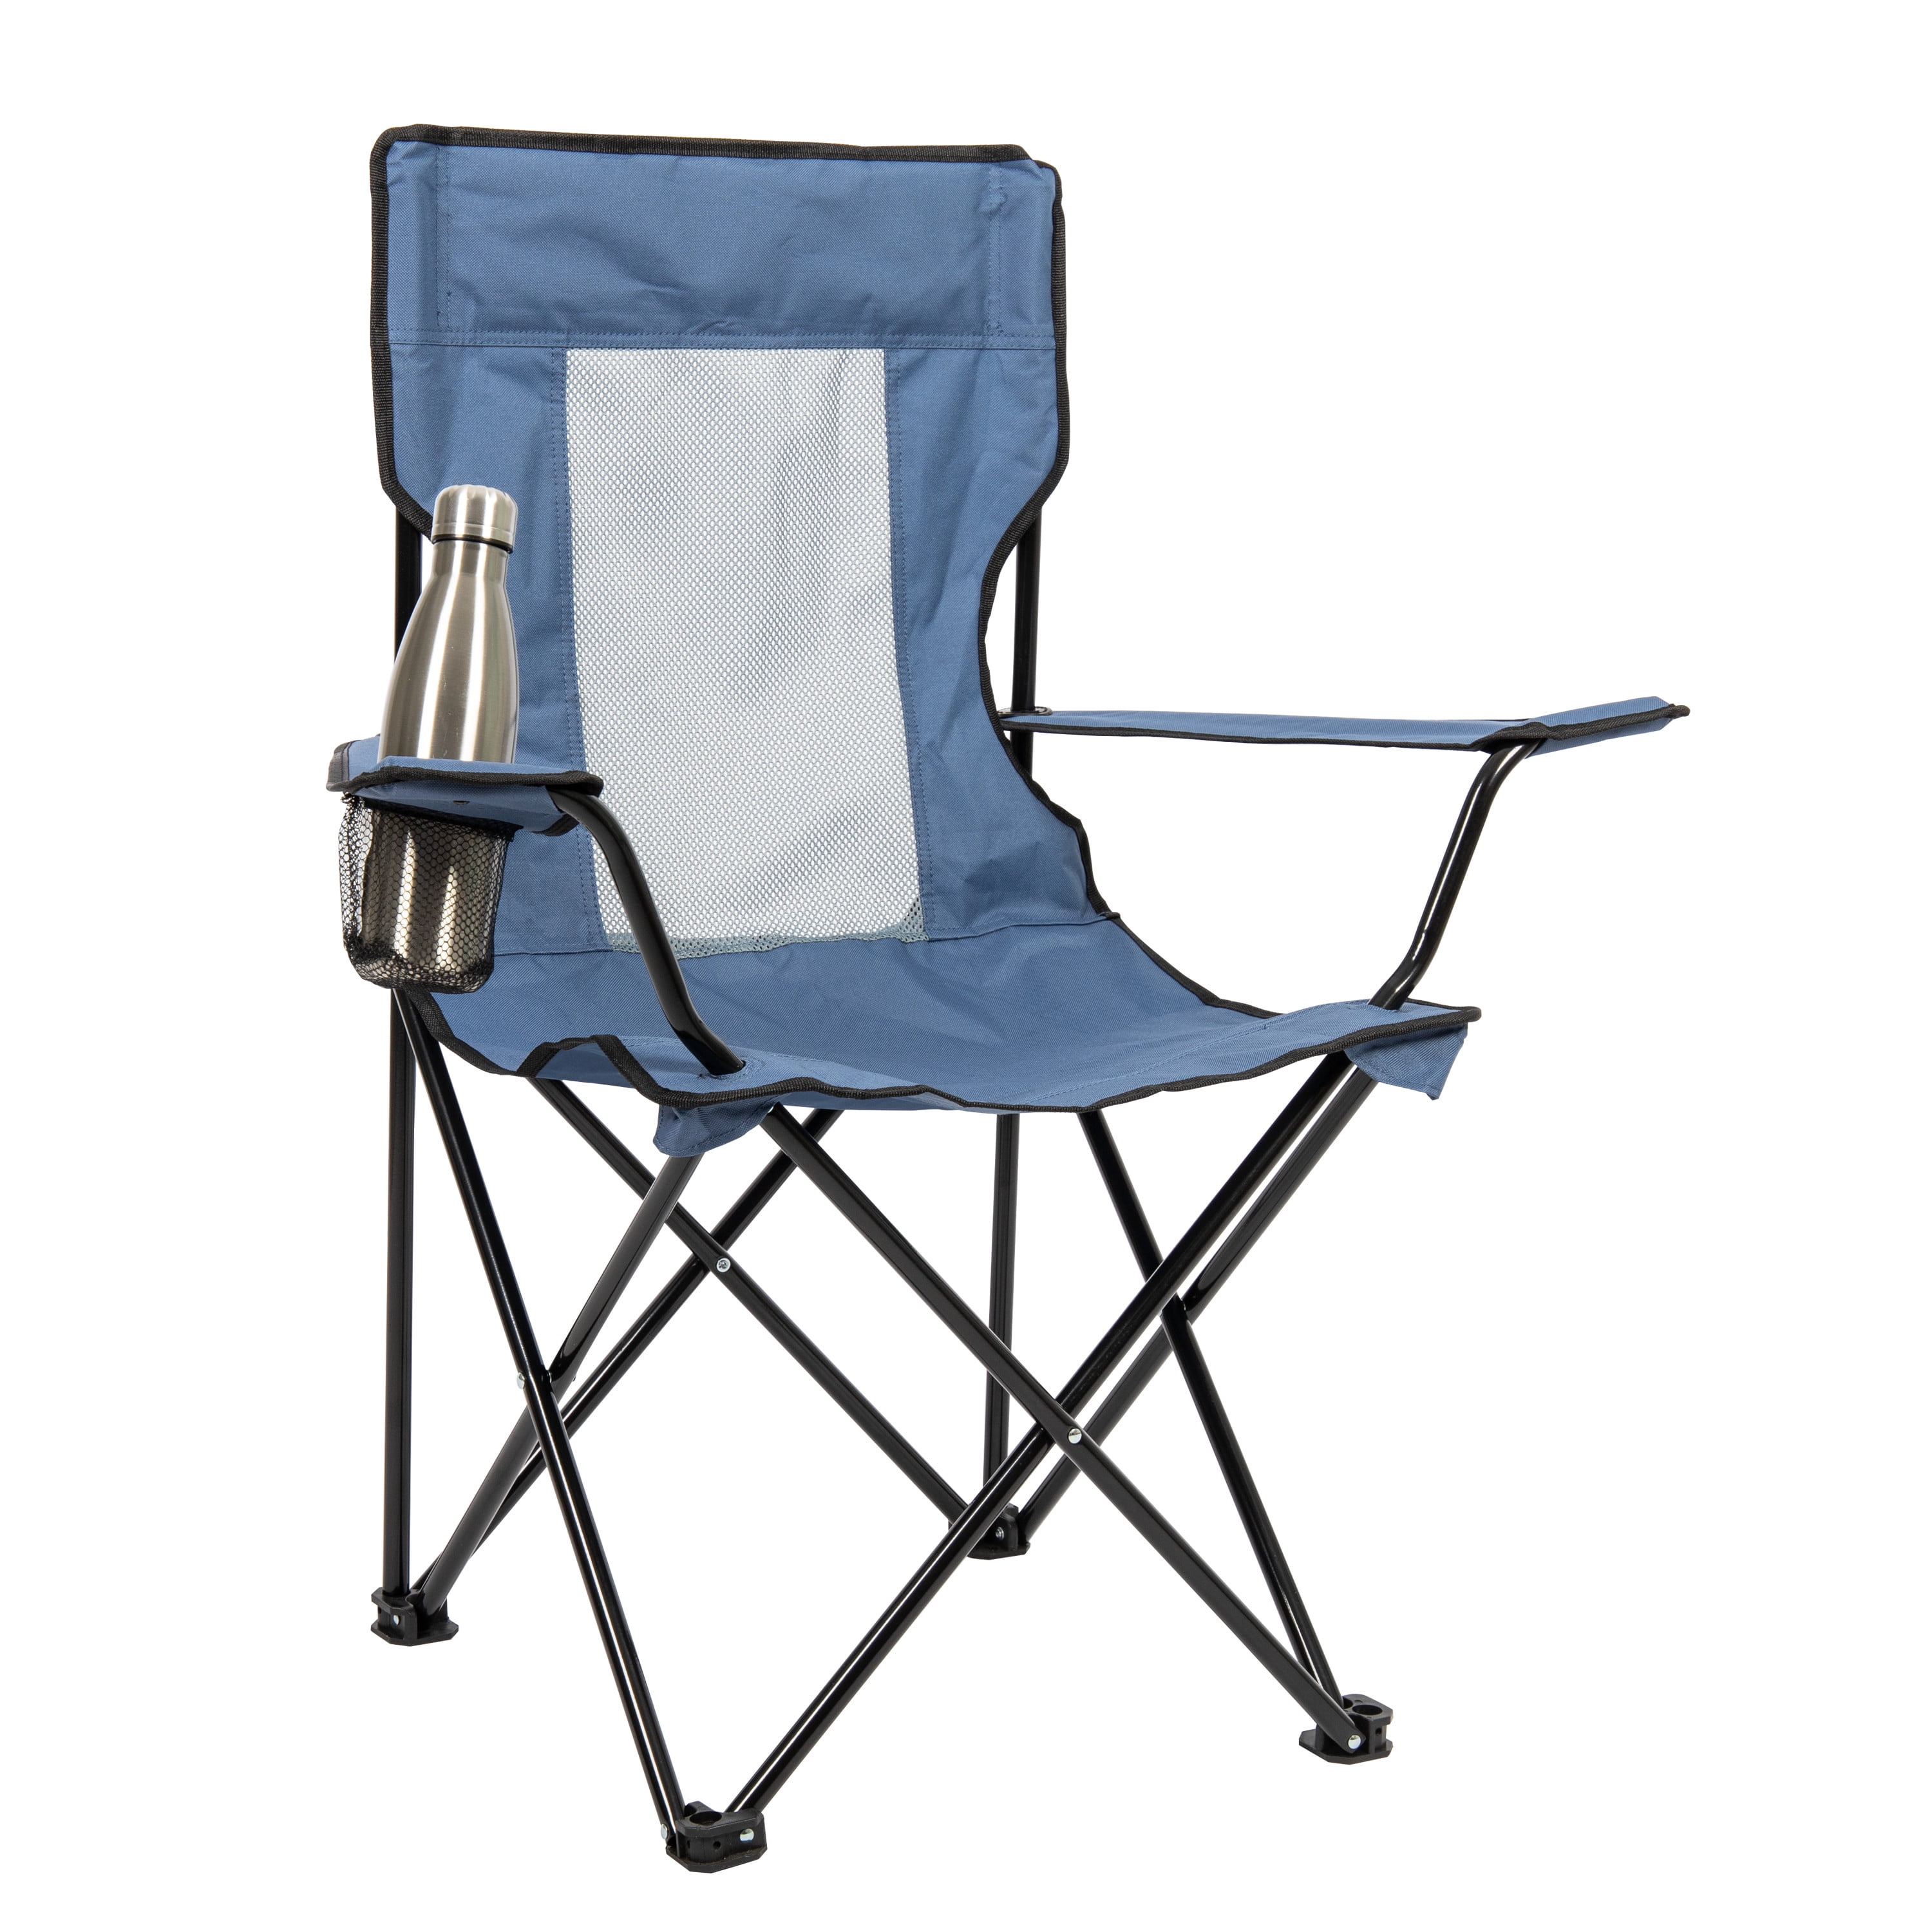 ARROWHEAD OUTDOOR Multi-Function 3-in-1 Compact Camp Chair: Backpack, Stool  & Insulated Cooler, w/ External Pockets & Storage Bag, Lightweight, Large  Backpack, Fishing, Hiking, Heavy-Duty, USA-Based 